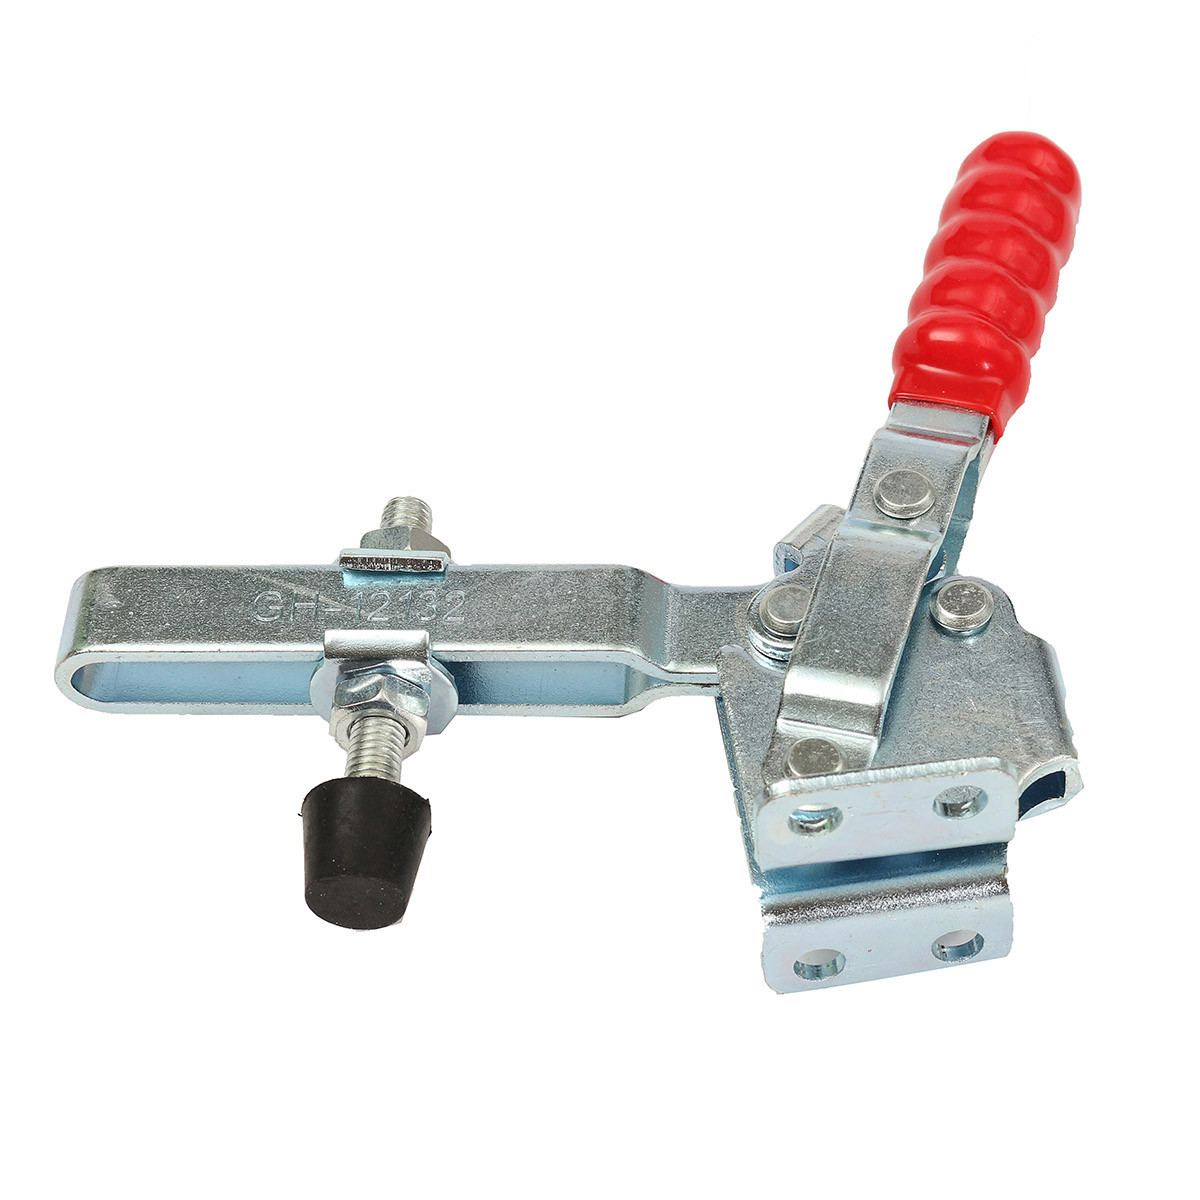 227KG-Holding-Capacity-Quick-Release-U-Bar-Hand-Tool-Vertical-Type-Toggle-Clamp-1103853-4